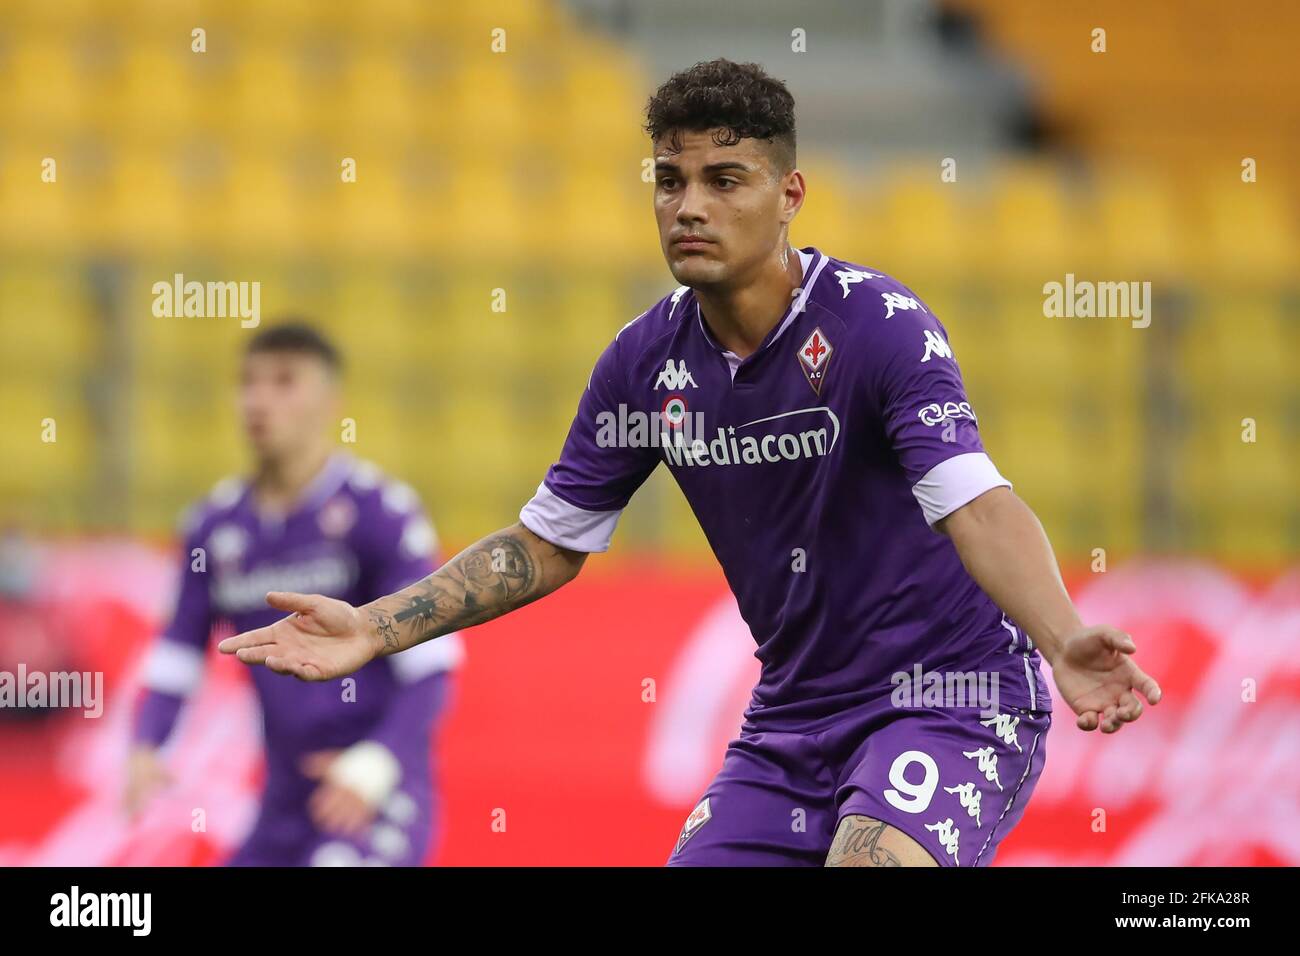 Italy - ACF Fiorentina U19 - Results, fixtures, squad, statistics, photos,  videos and news - Soccerway